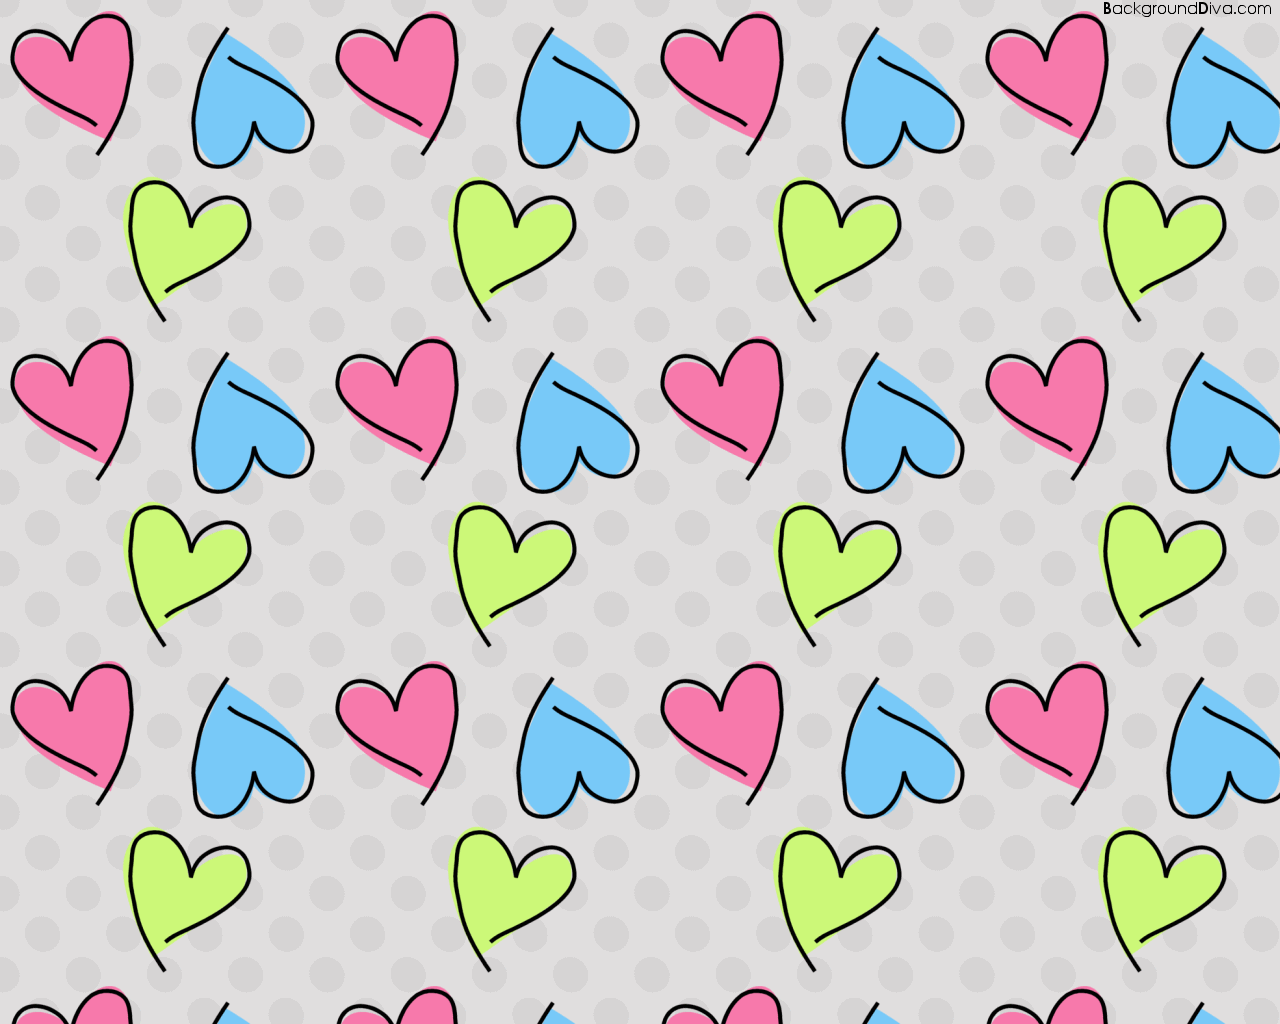 girly wallpapers for computermore girly hearts desktop wallpaper 1280x1024